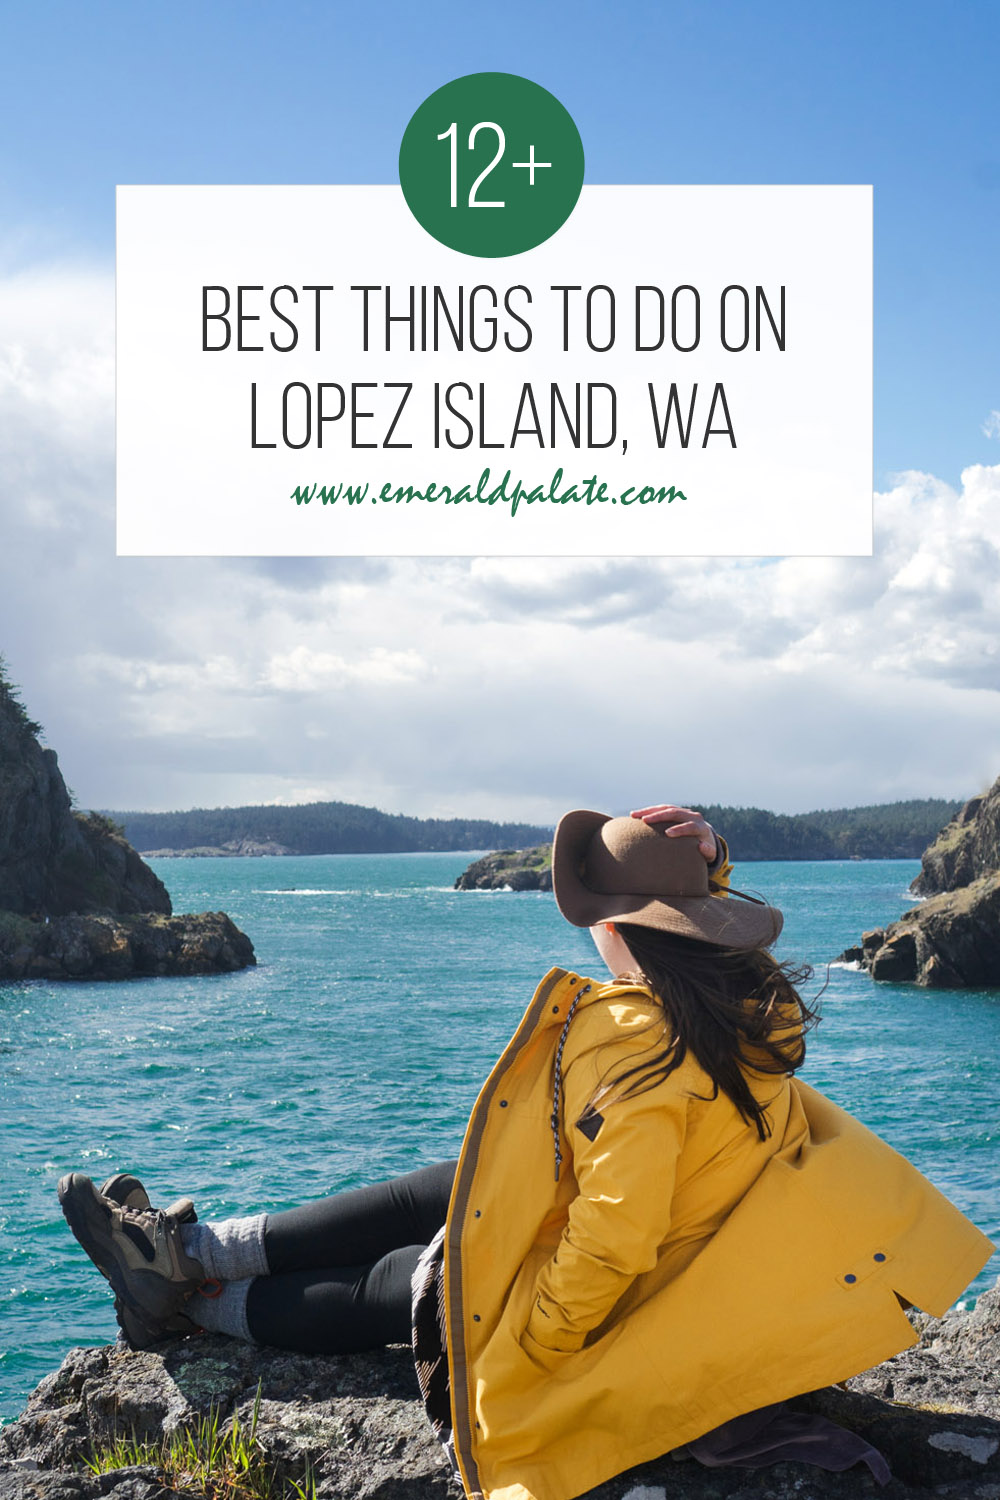 best things to do on Lopez Island, one of the San Juan Islands off Washington state